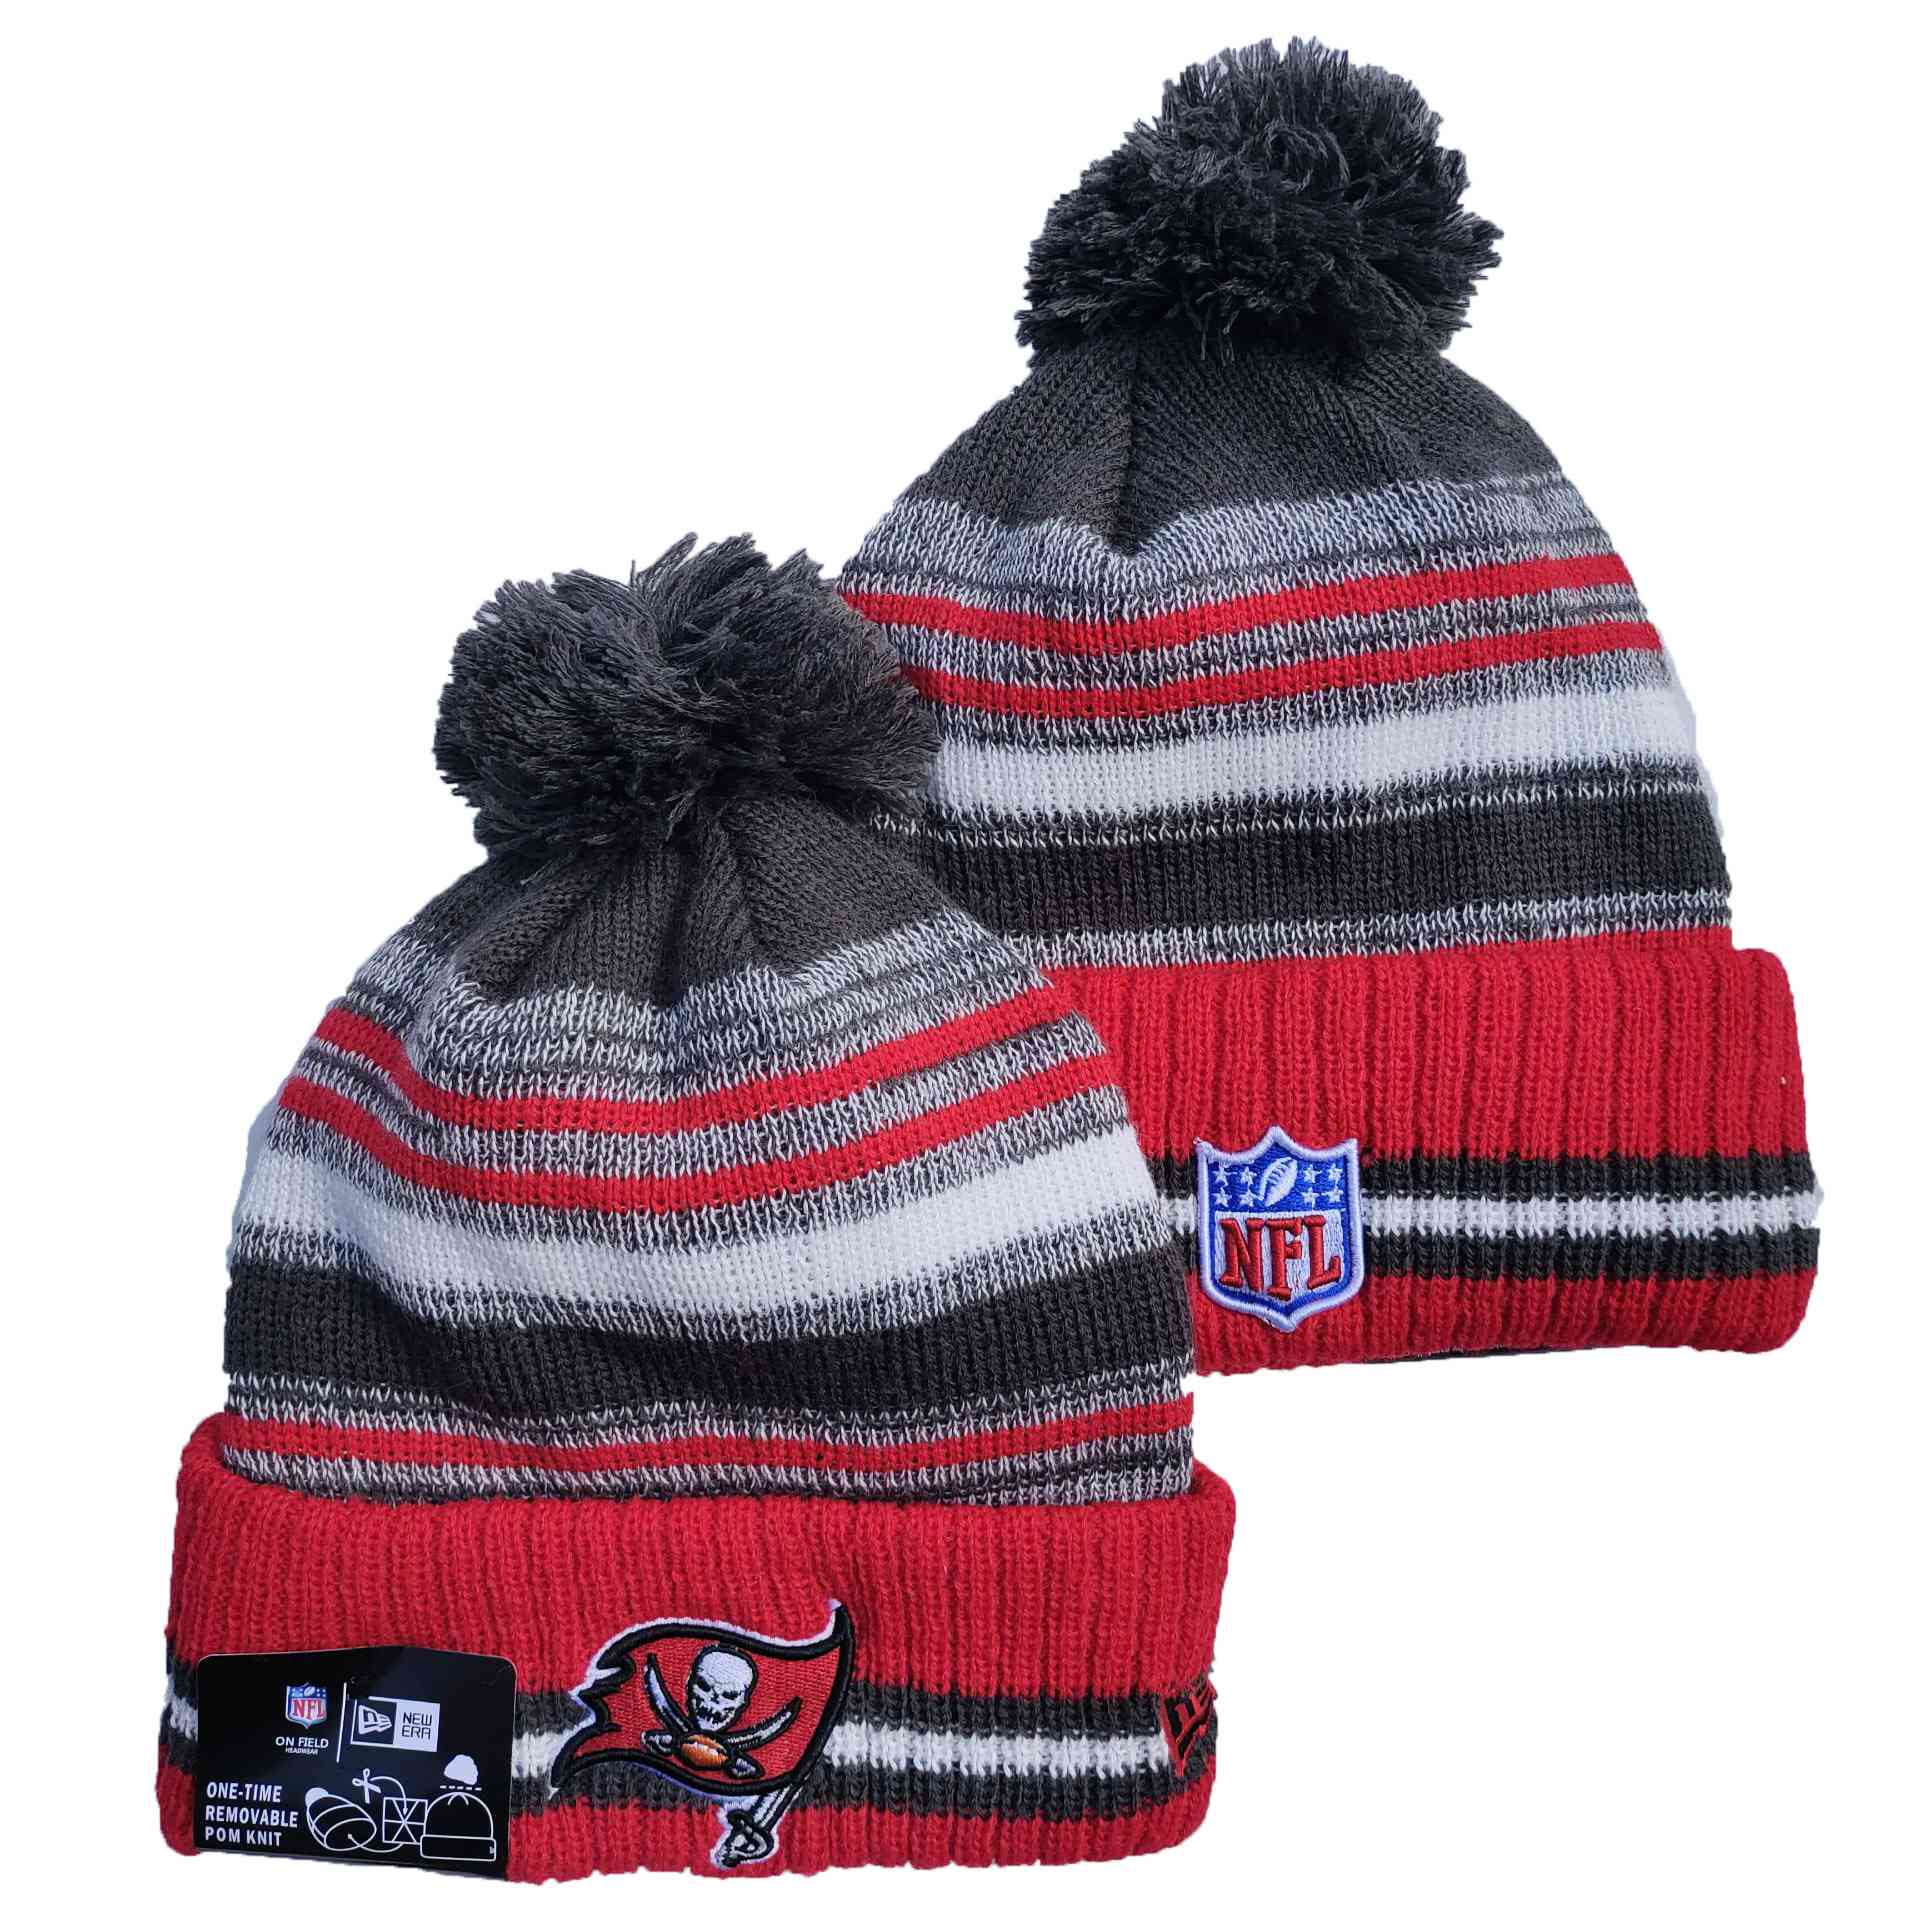 NFL Tampa Bay Buccaneers Beanies Knit Hats-YD1288